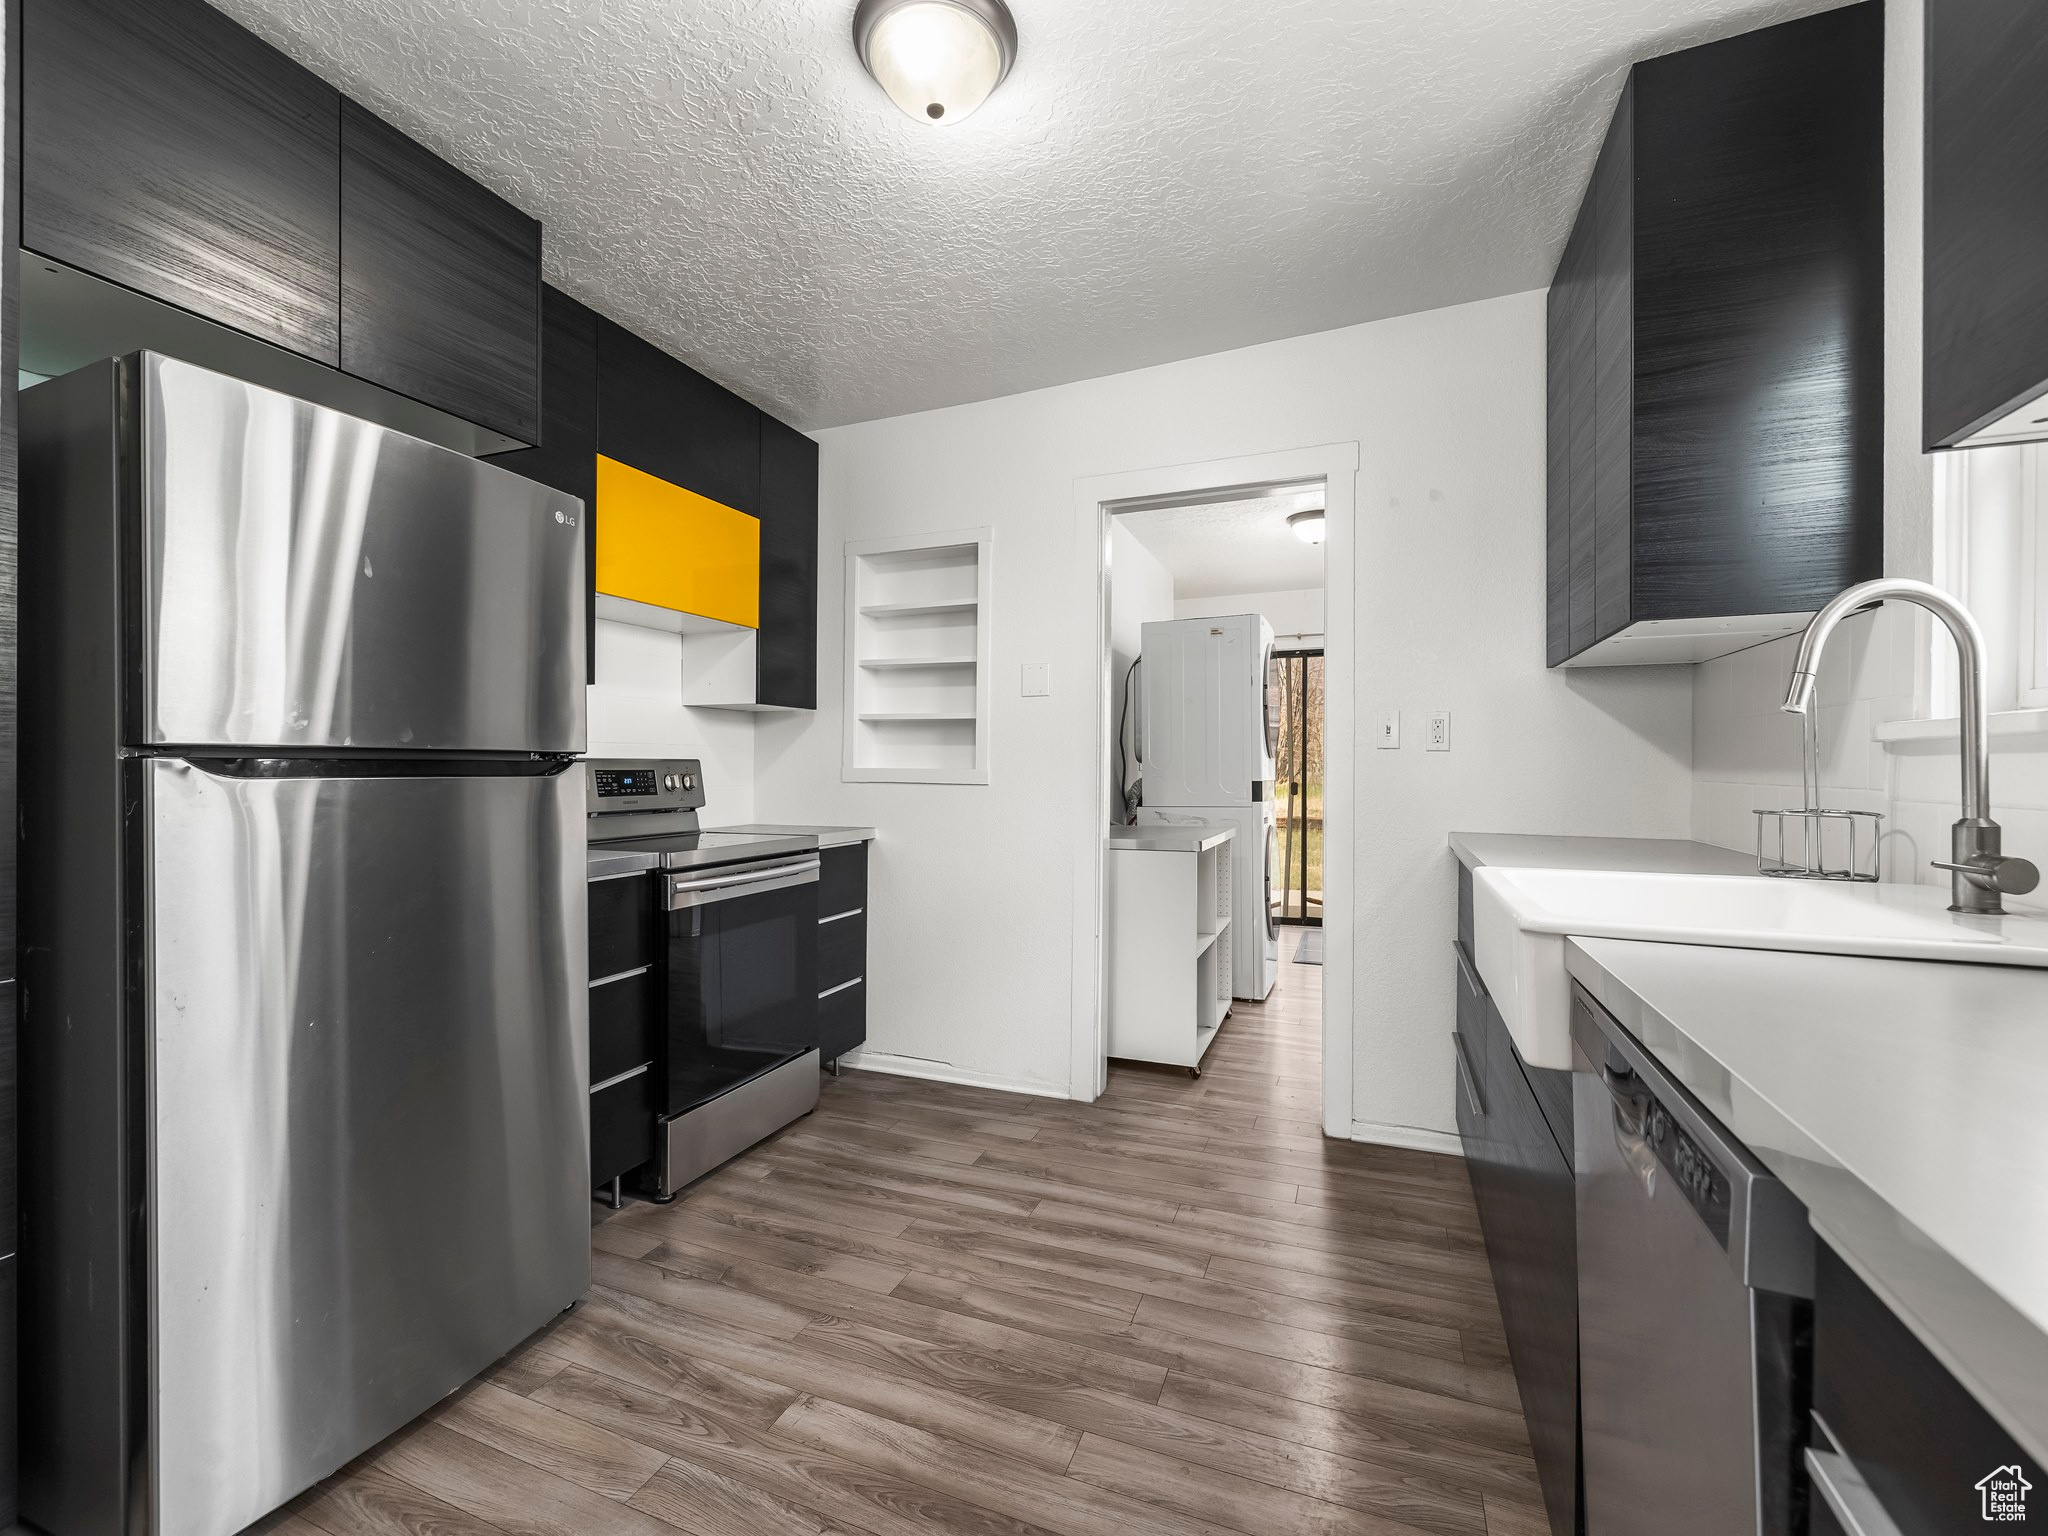 Kitchen with built in features, stainless steel appliances, wood-type flooring, a textured ceiling, and sink